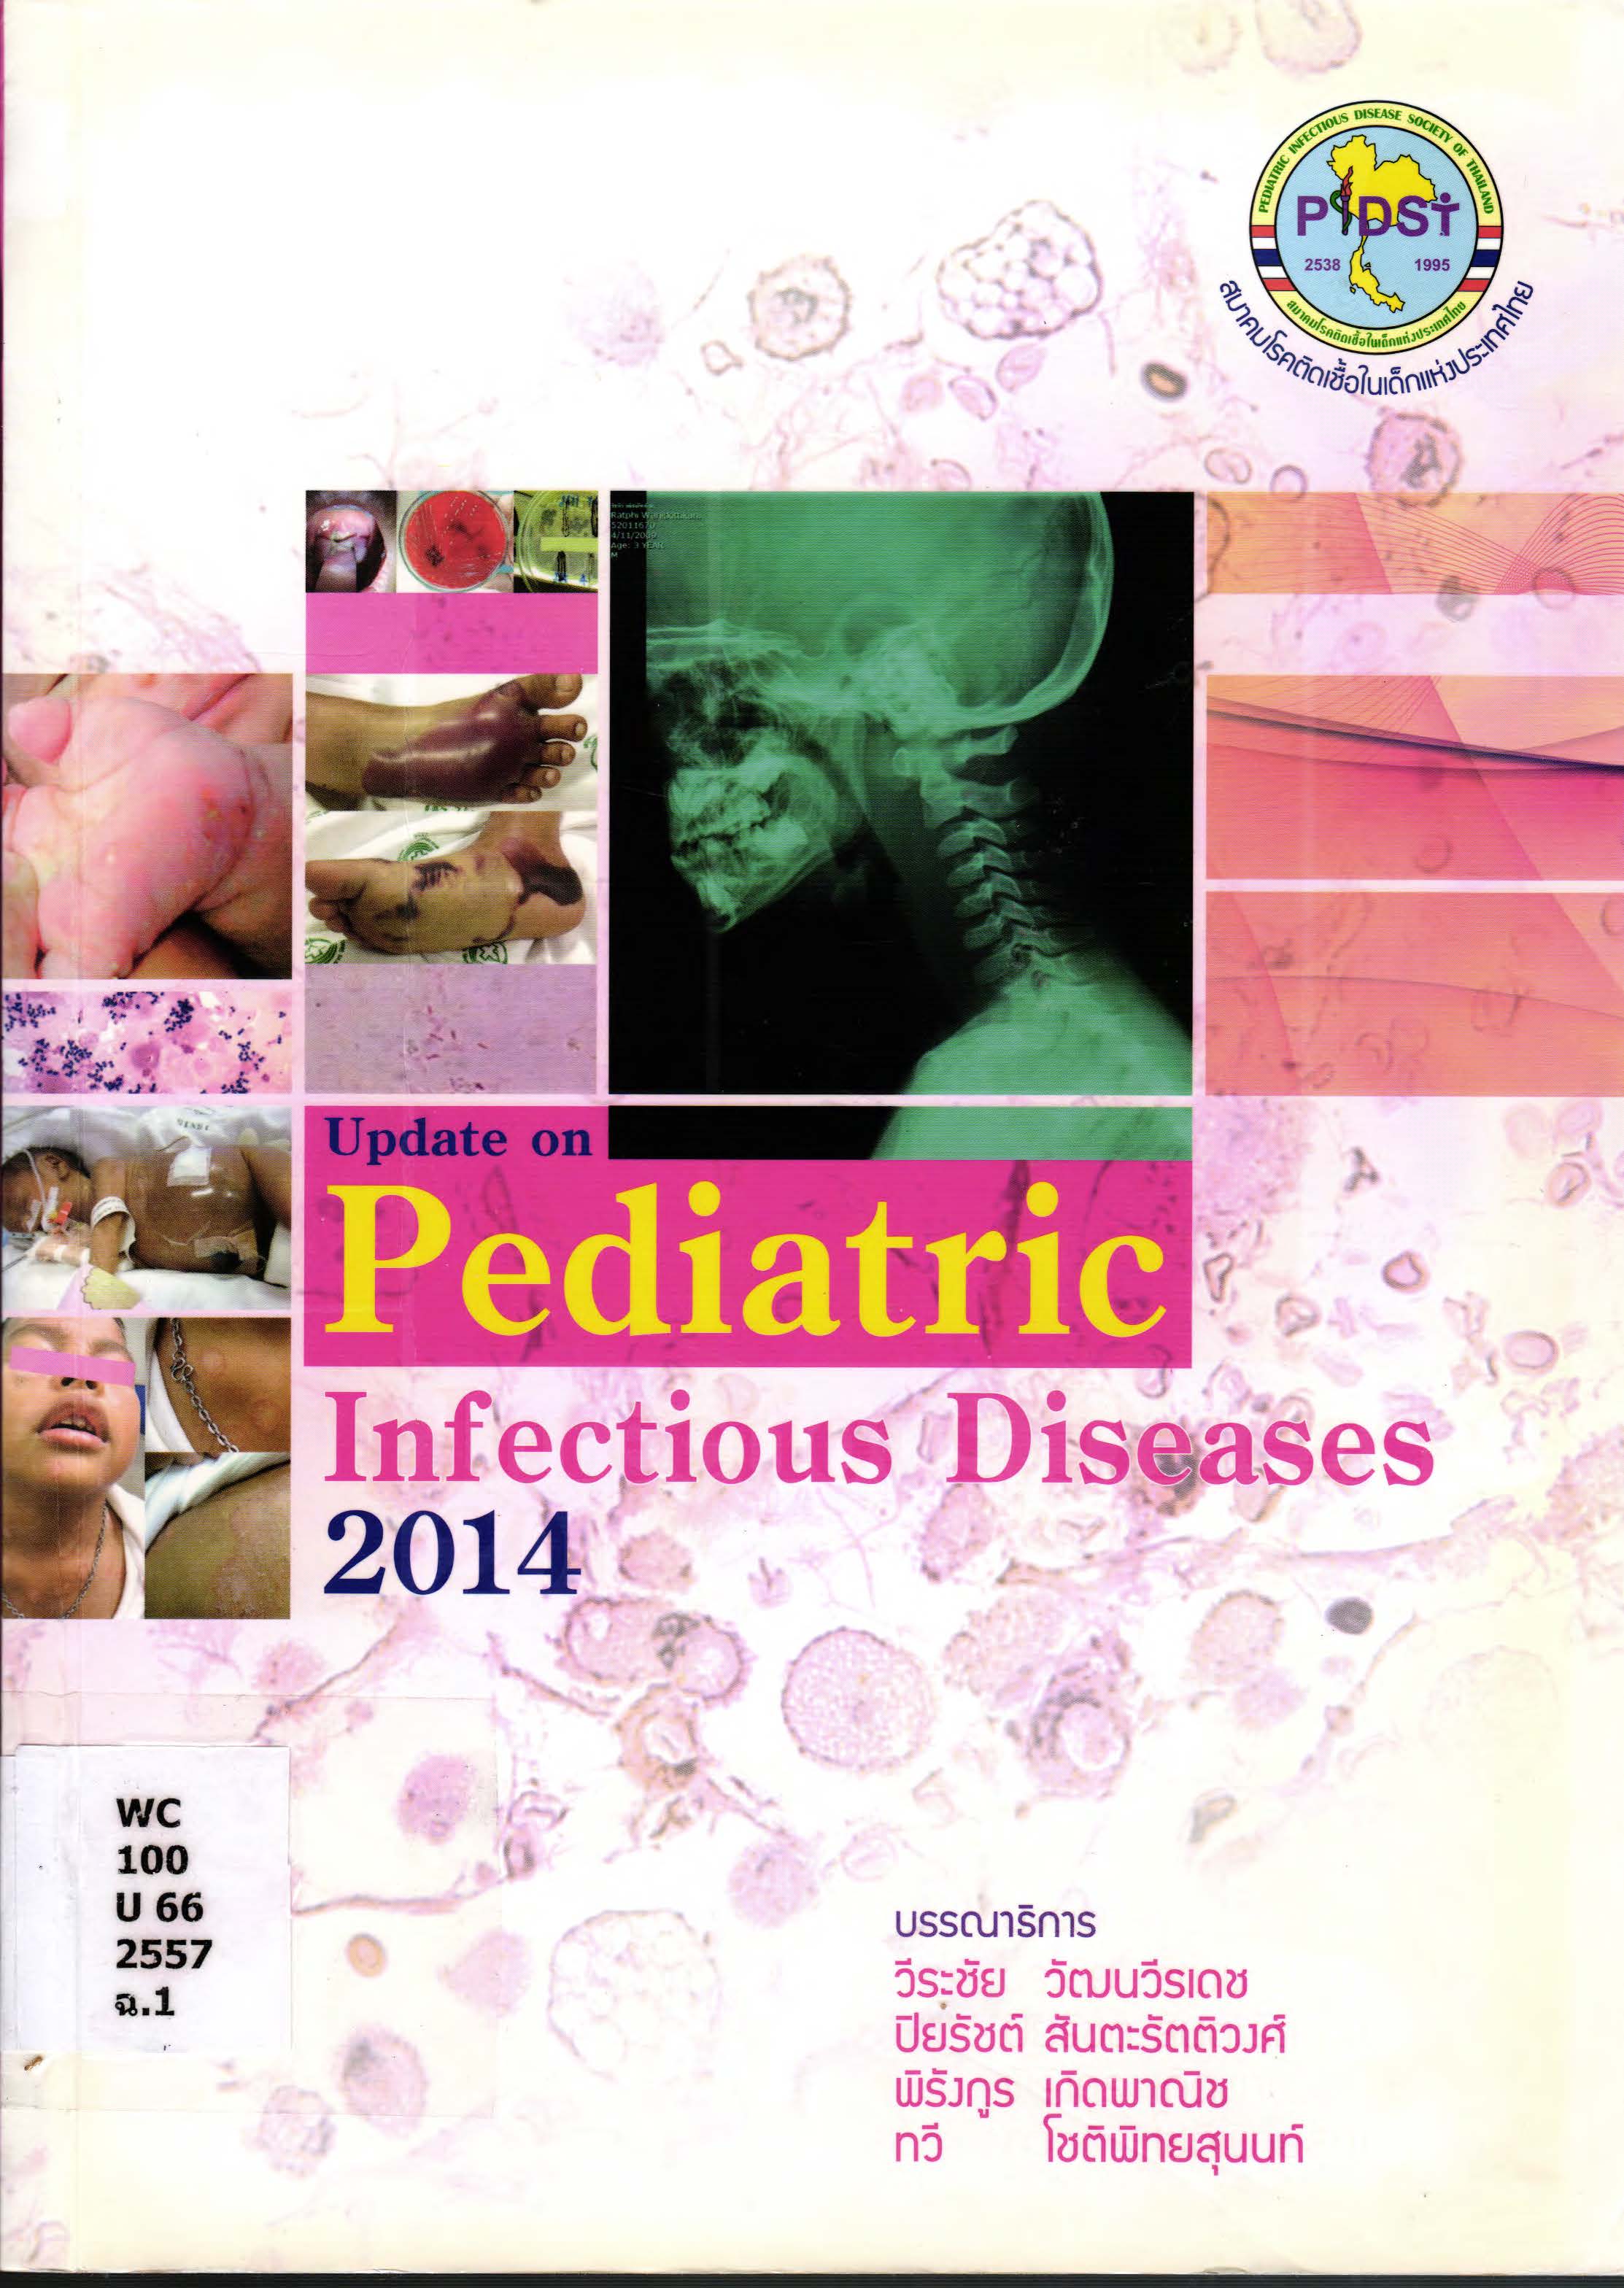 Update on pediatric Infectious diseases 2014